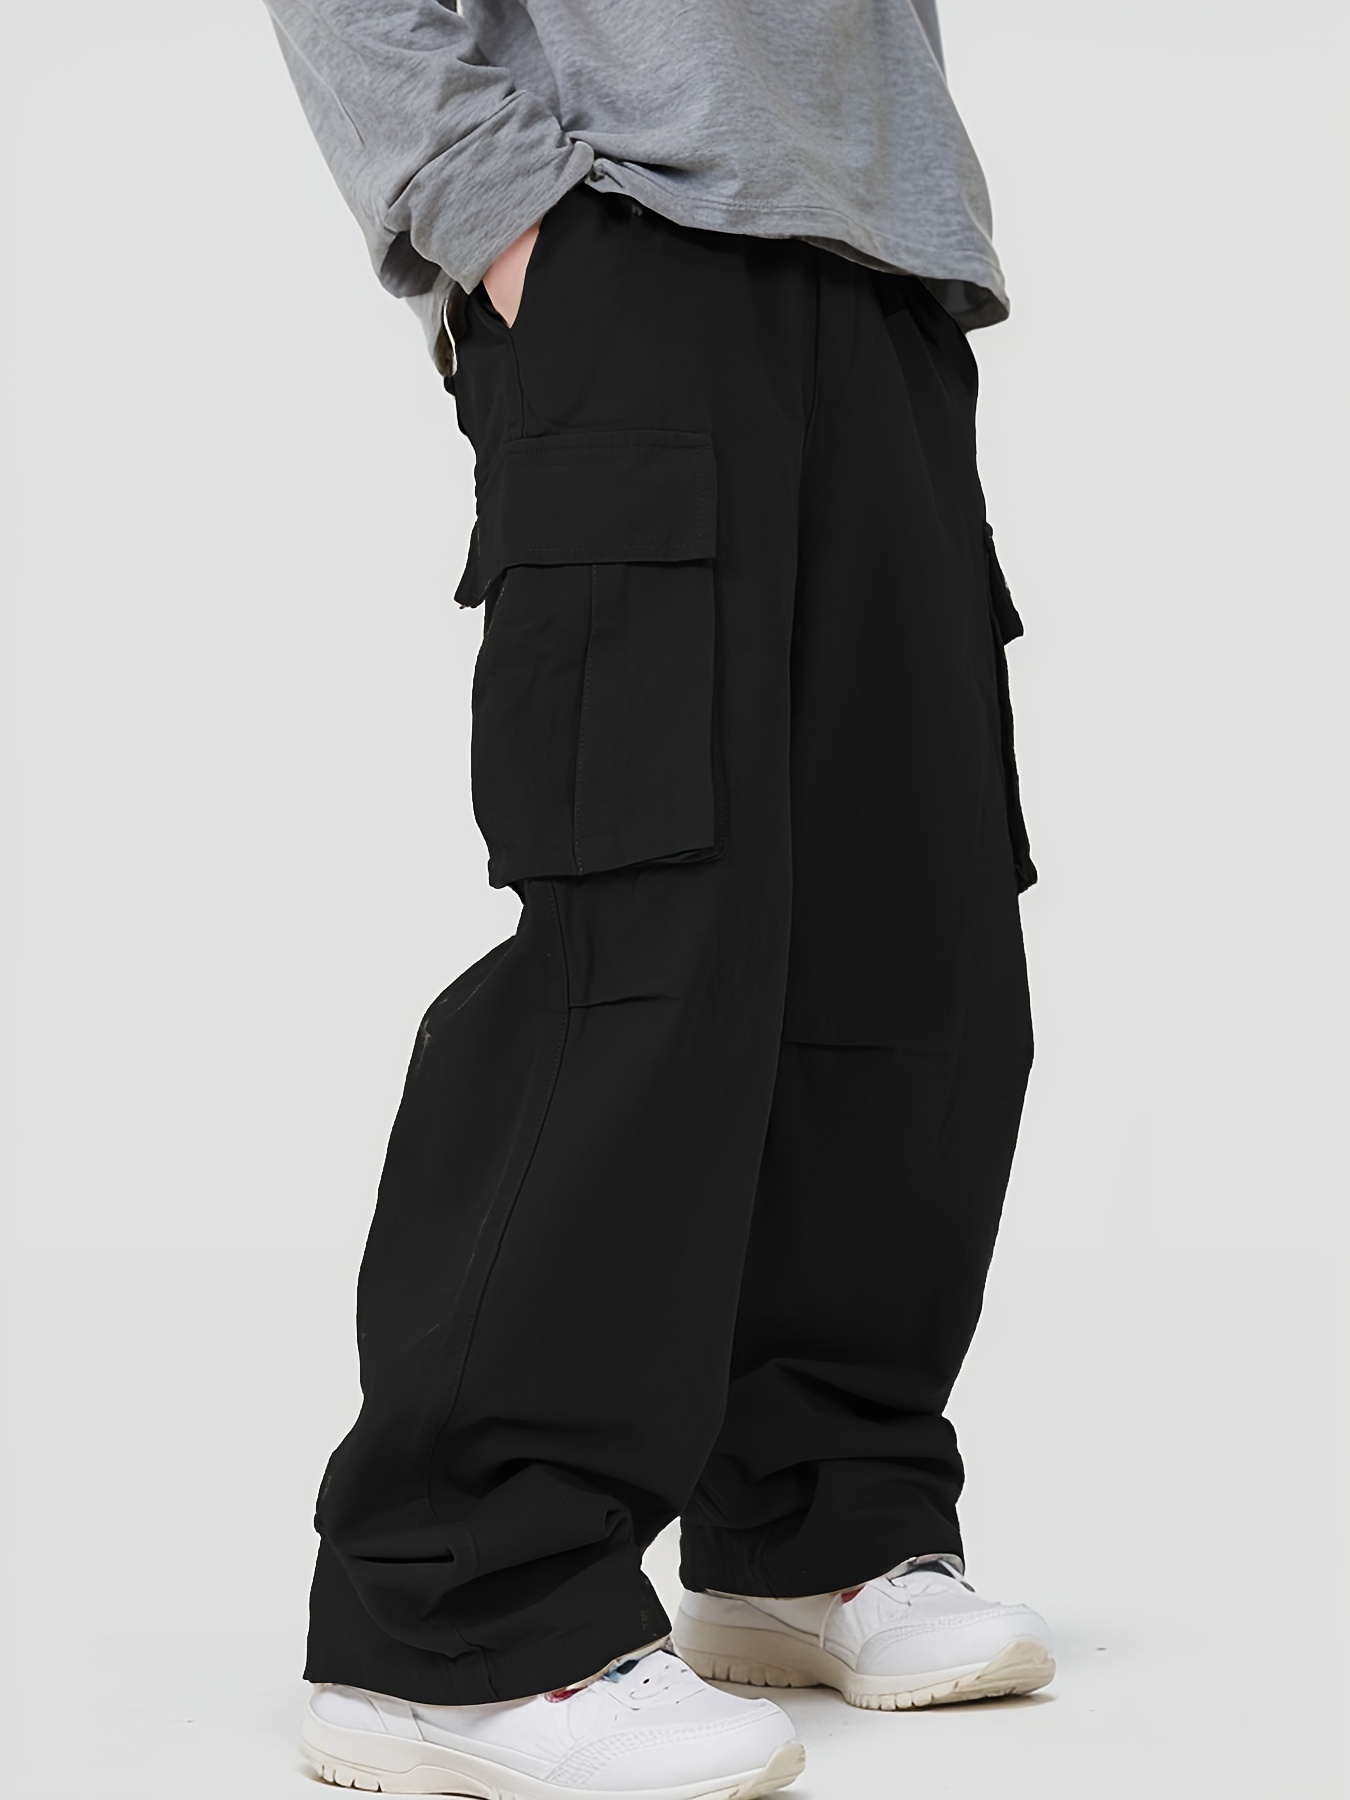 Cargo Trousers for Men, Minus-Two Cargos Pants, Y2k Jeans, 90s  Adjustable Mens Printed Hip Hop Street Costumes